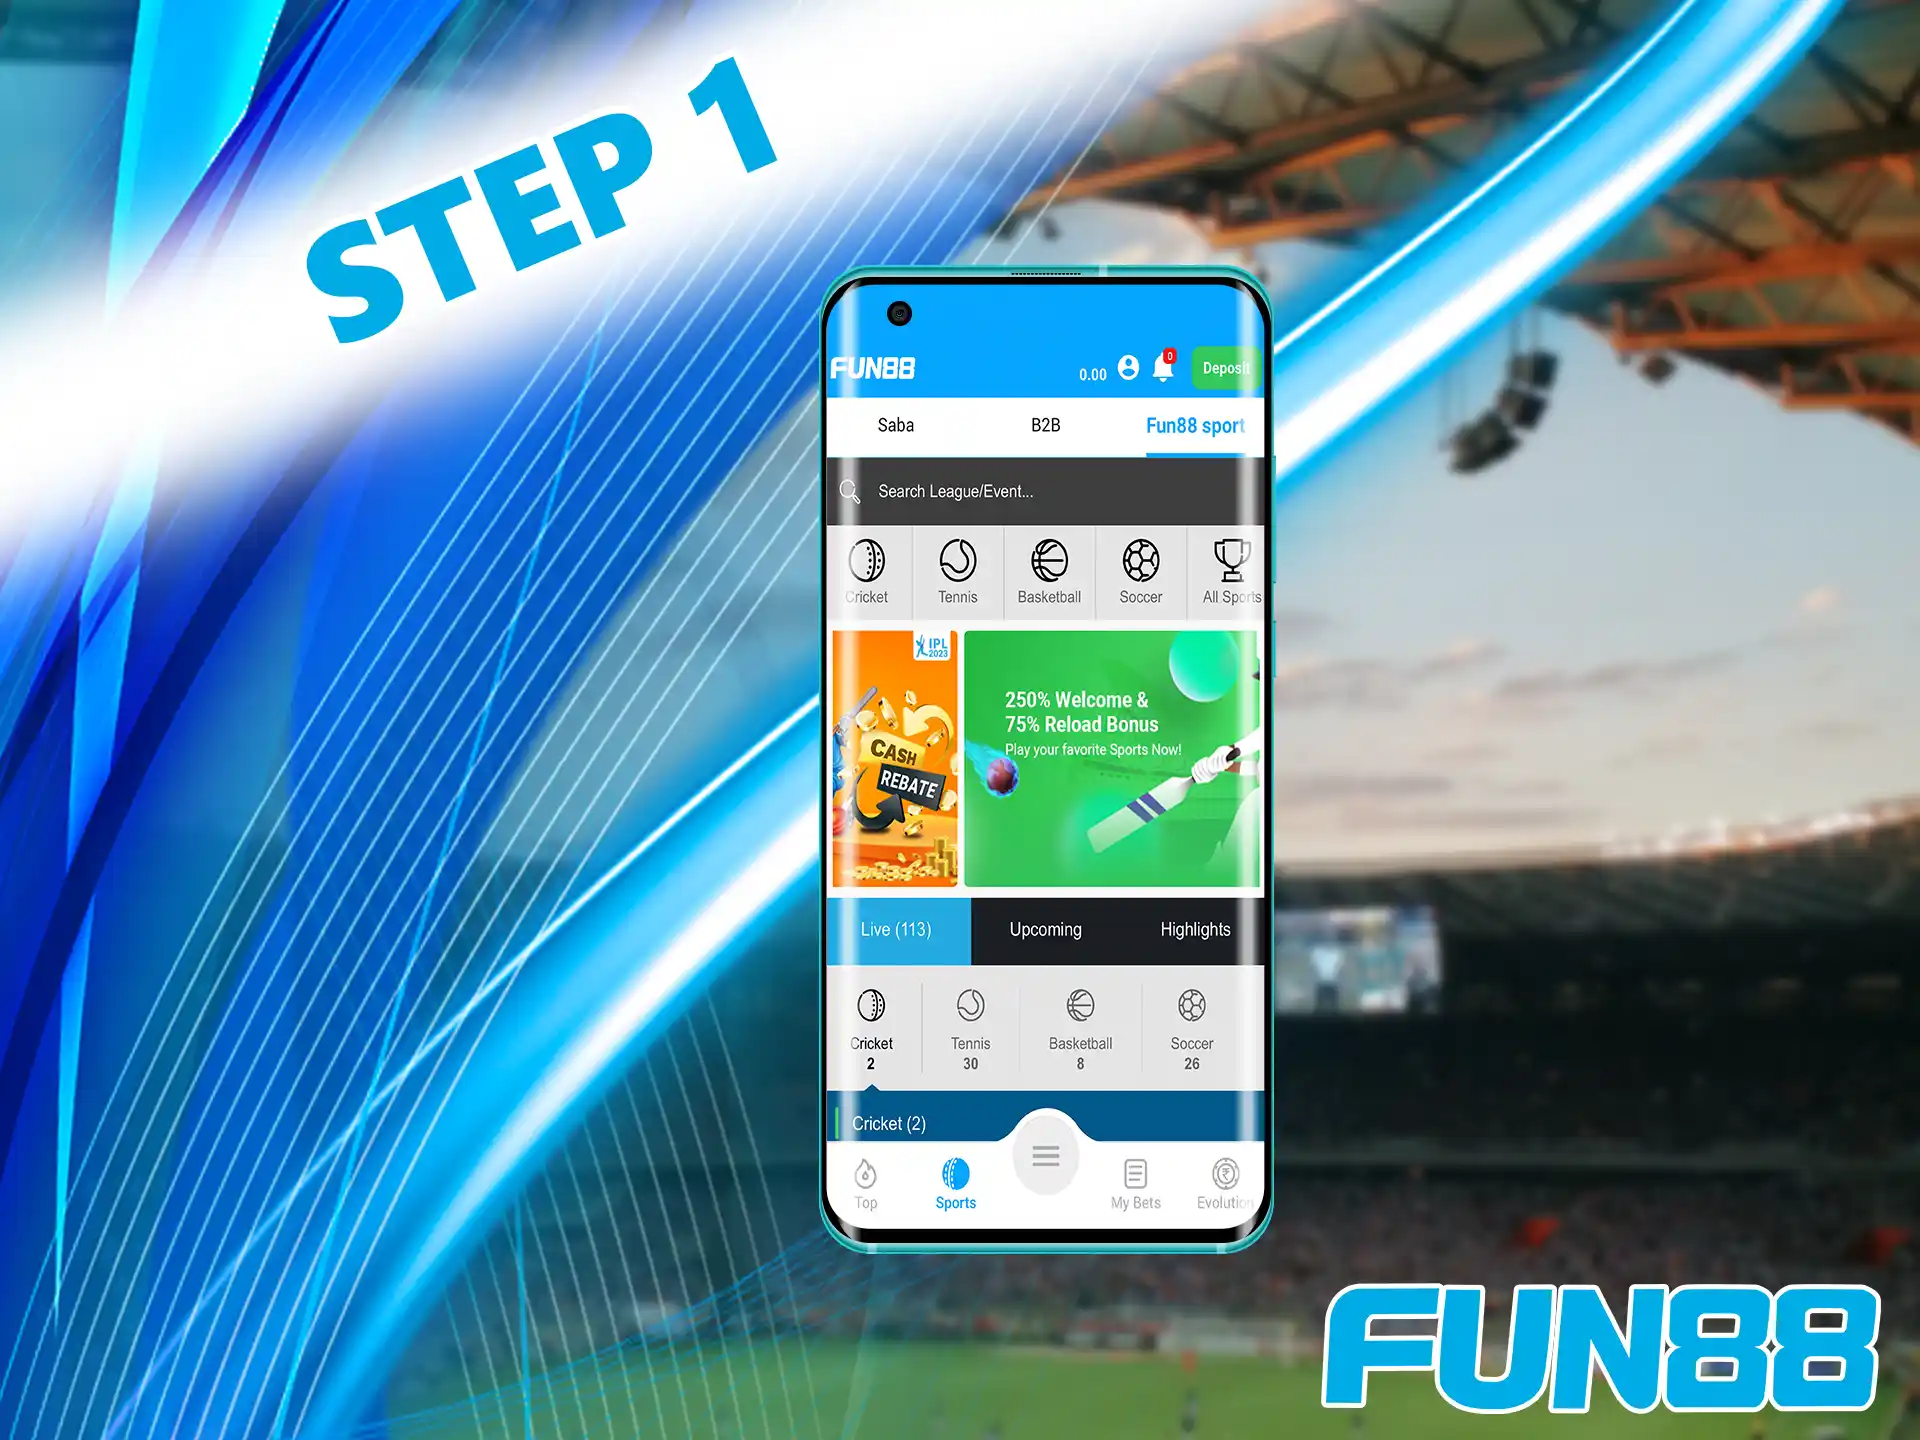 In order to start betting, open the main page of Fun88 using the link in the header.